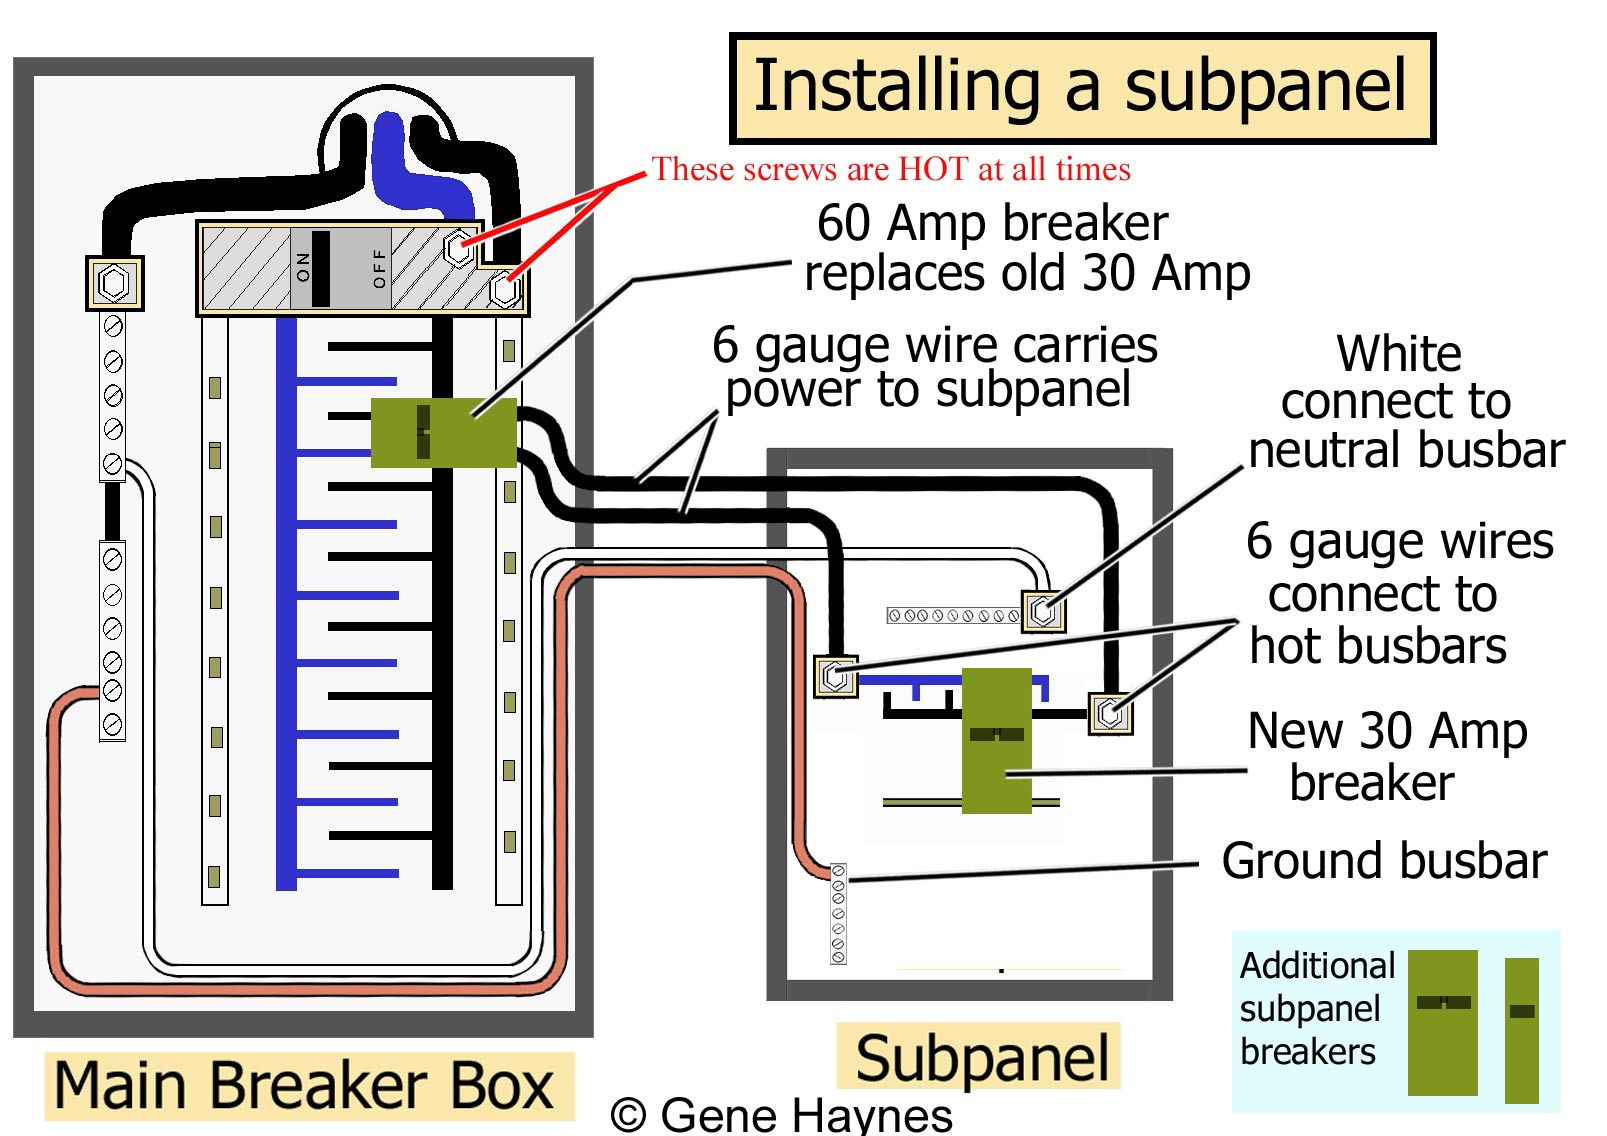 Wiring A Sub Panel - Today Wiring Diagram - 125 Amp Sub Panel Wiring Diagram